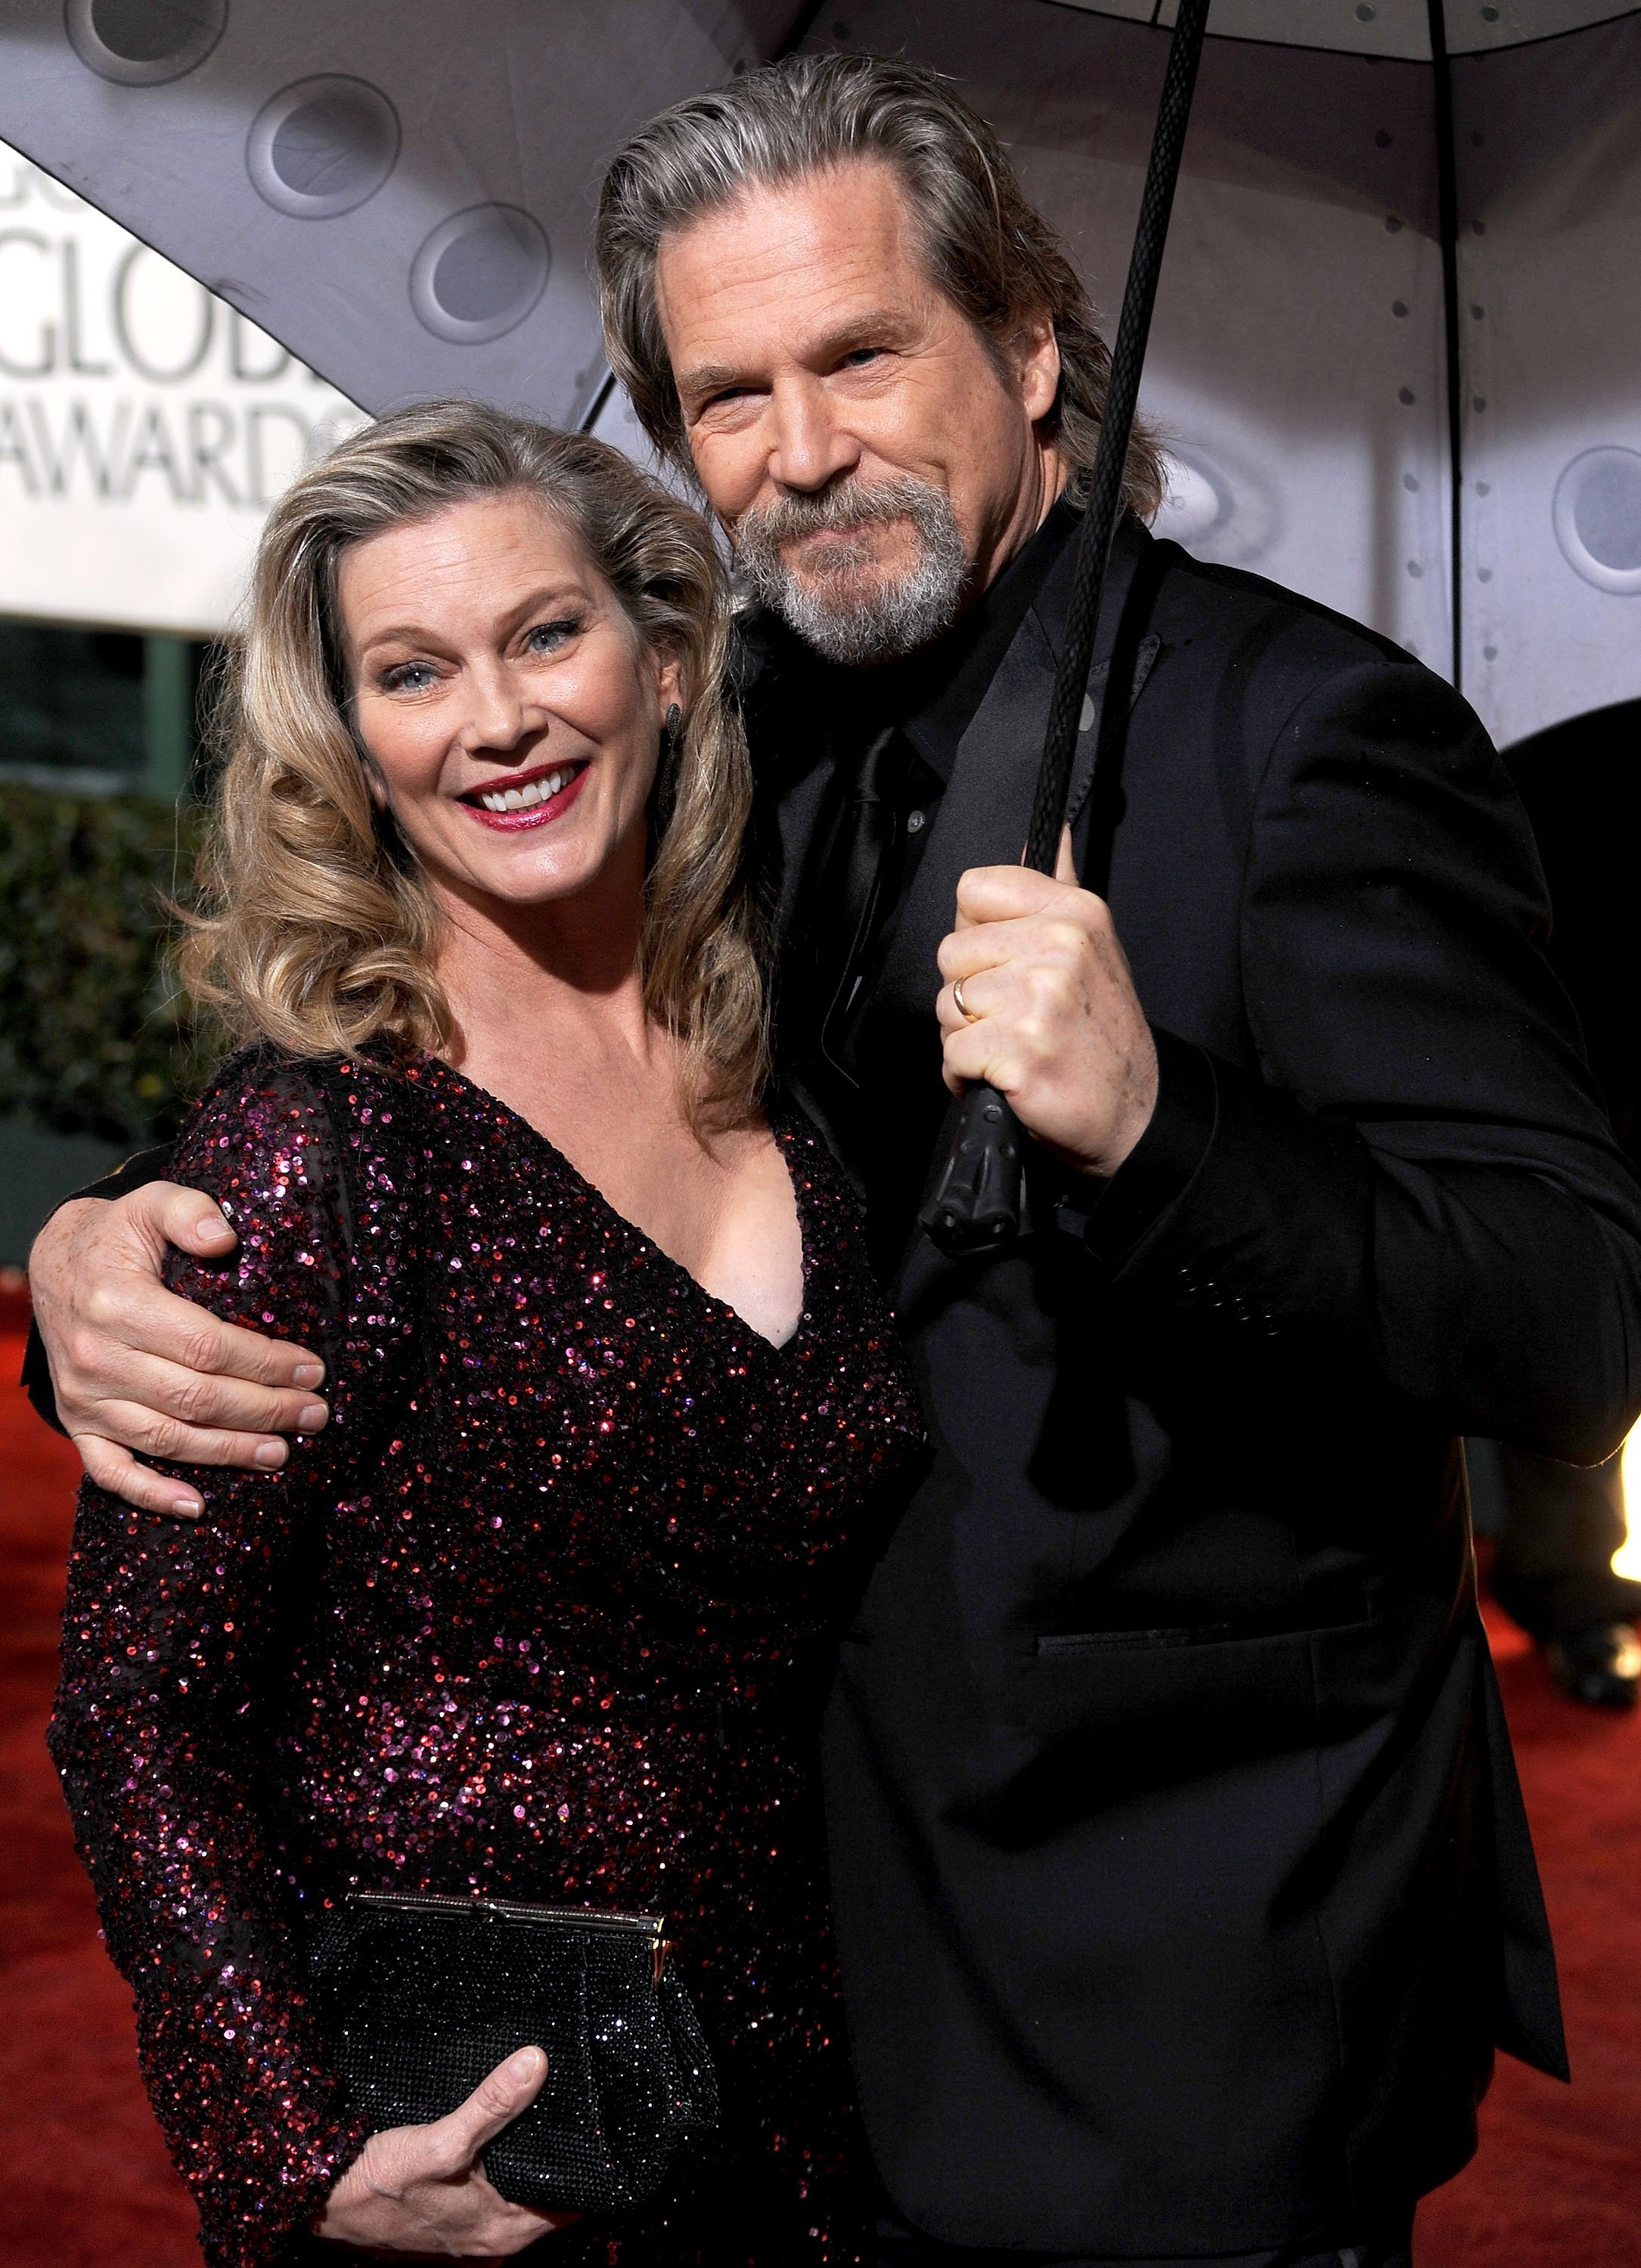 Susan Geston and actor Jeff Bridges arrive at the 67th Annual Golden Globe Awards on January 17, 2010.  Photo: Getty Images